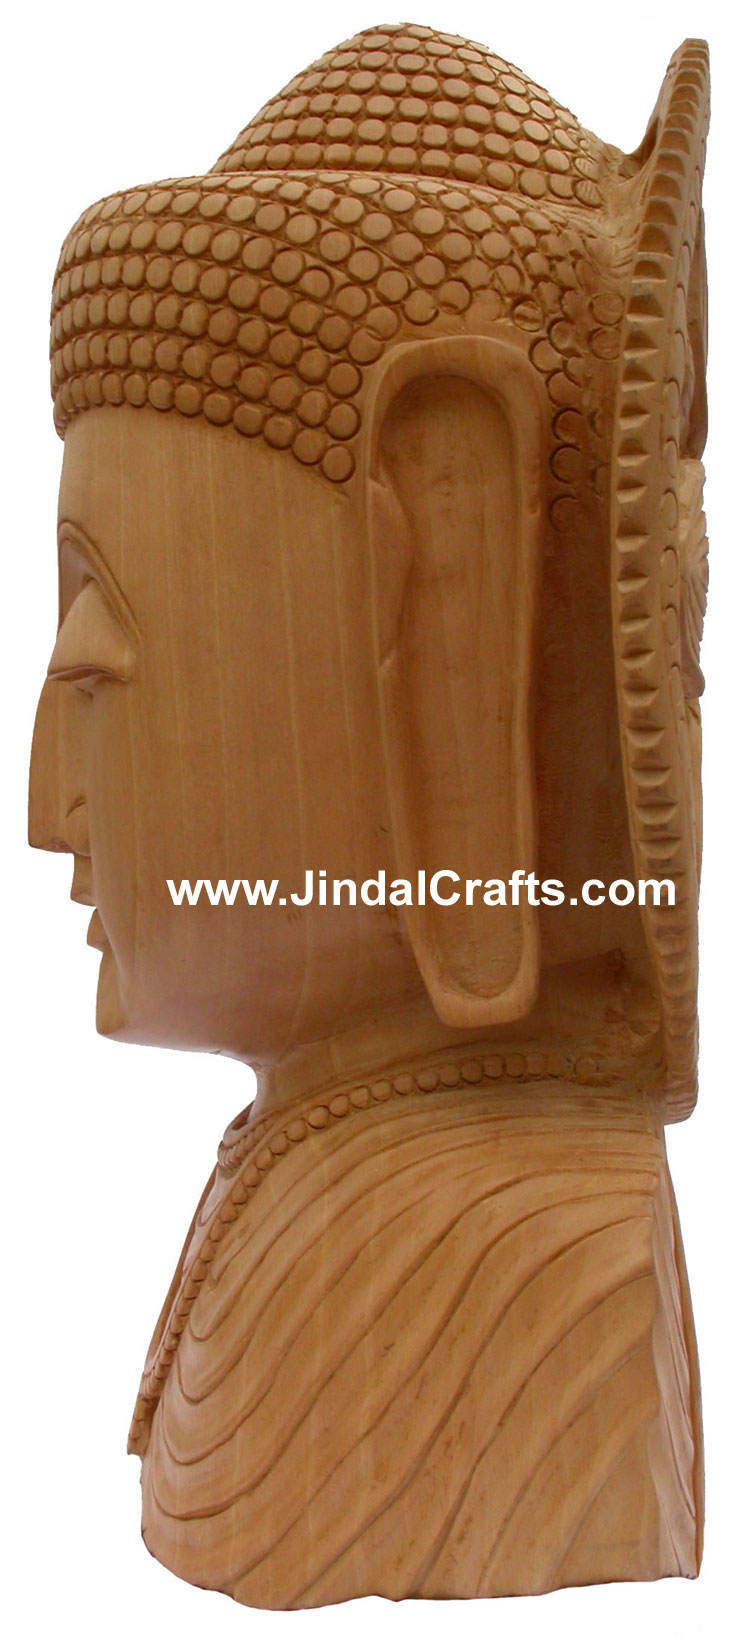 Wood Sculpture Hand Crafted Peaceful Buddha Bust in Meditation Sculpture Statues